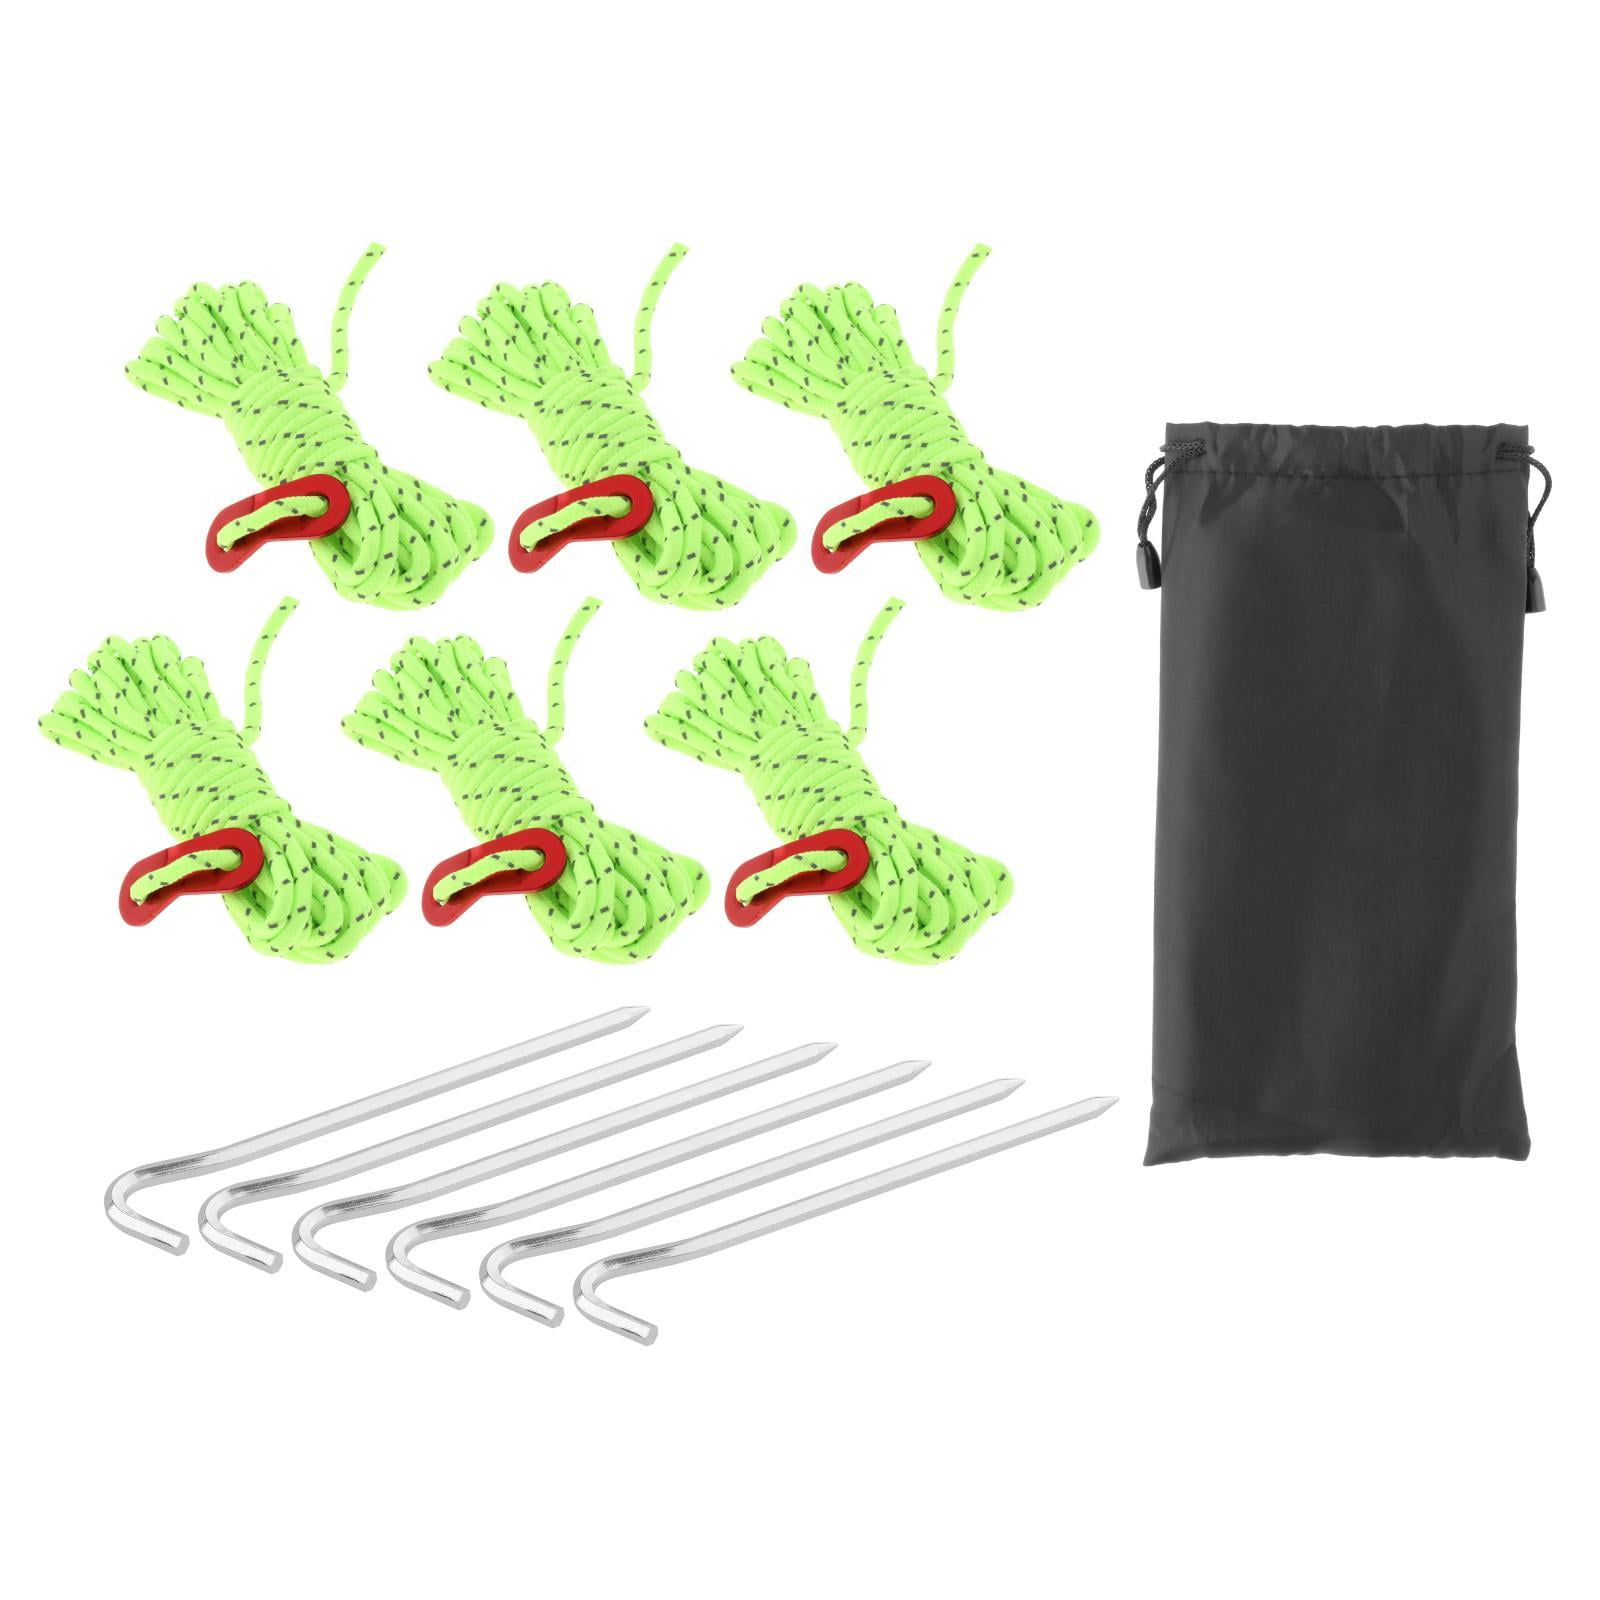 4Pcs Fluorescent Green Tent Guide Rope Tent Camping Reflecting Guy Rope 4M  New 